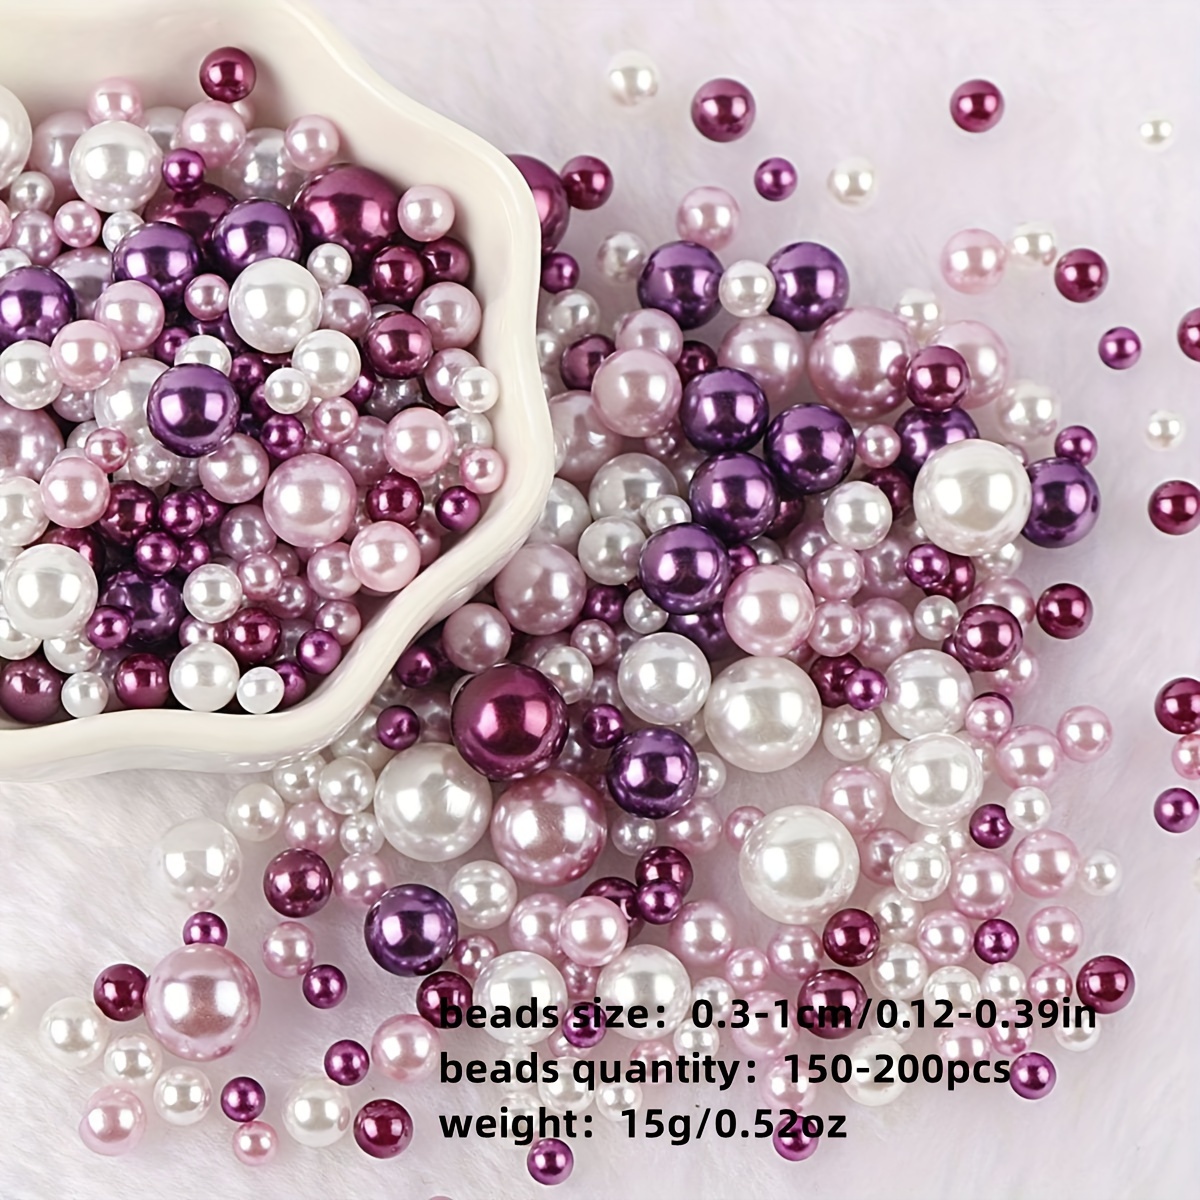 30g Mixed Faux Pearls, Cream Pearls, Rust Pearls, Mixed Shapes and Sizes  Acrylic Pearls For Jewellery Making and Crafts